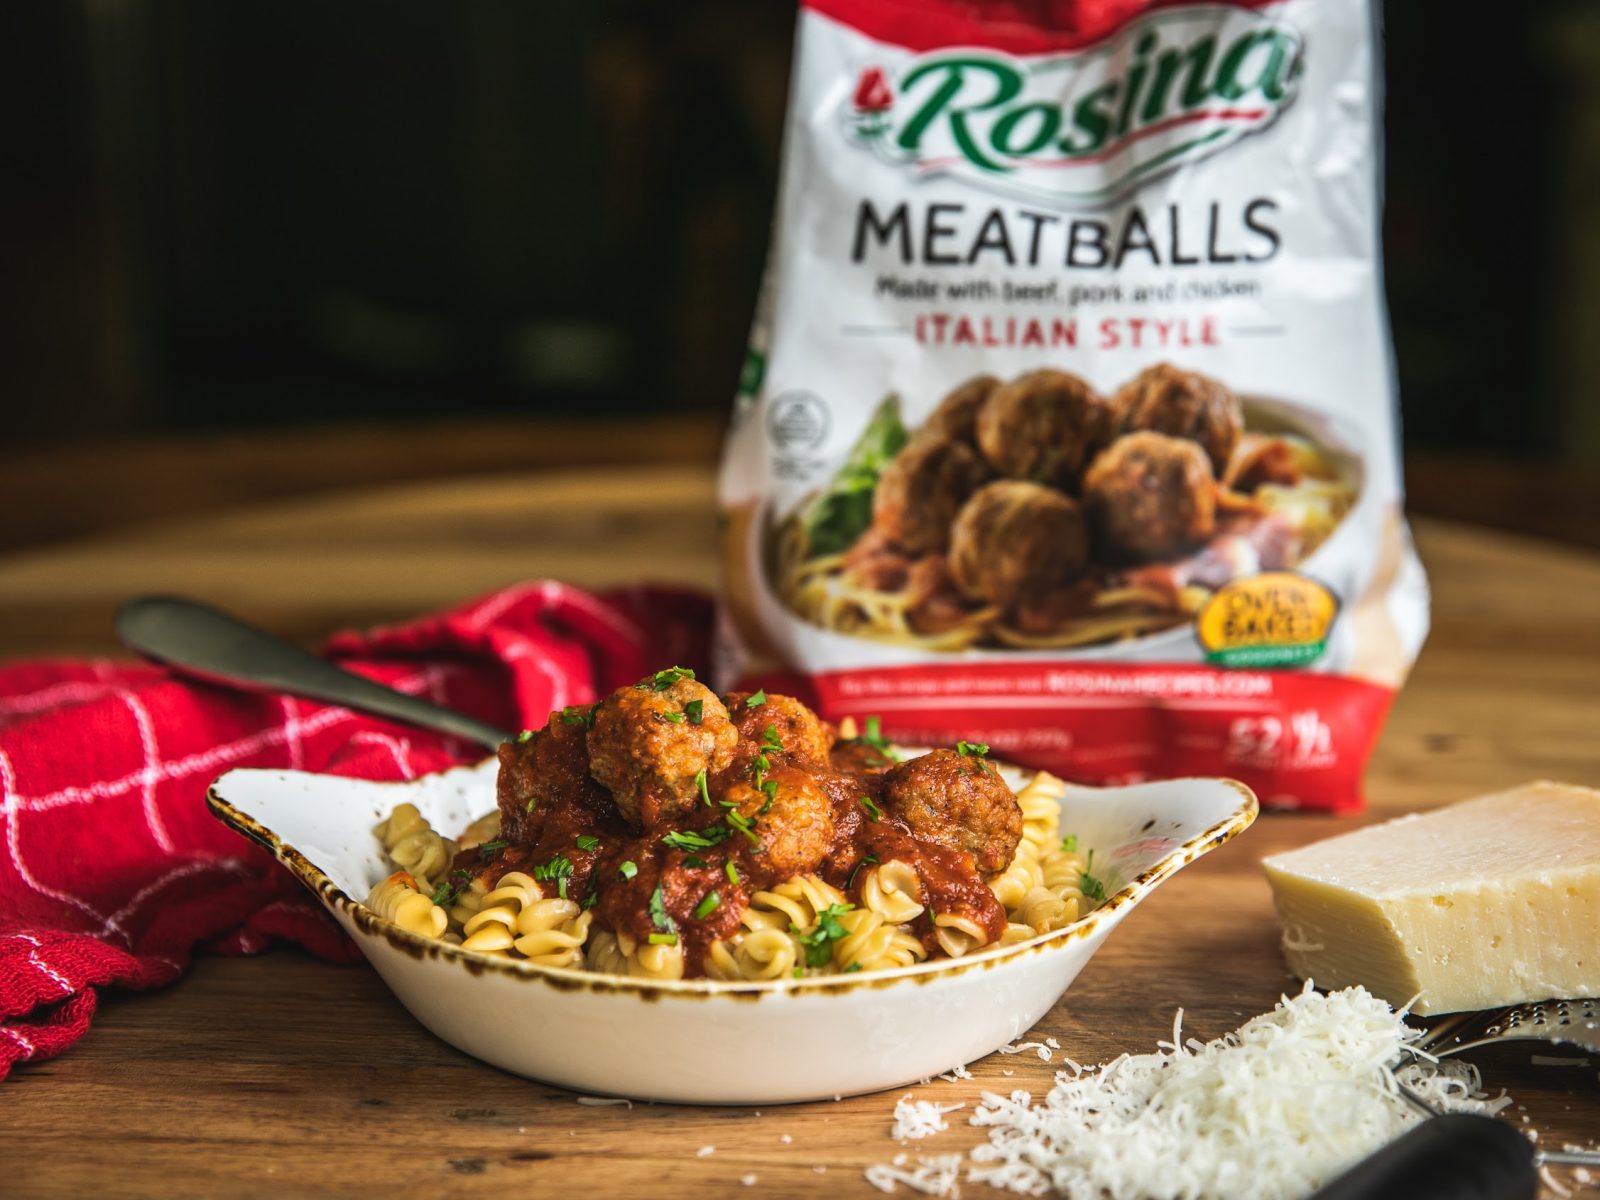 Four Delicious Varieties Of Rosina Meatballs Are Now Available At Publix